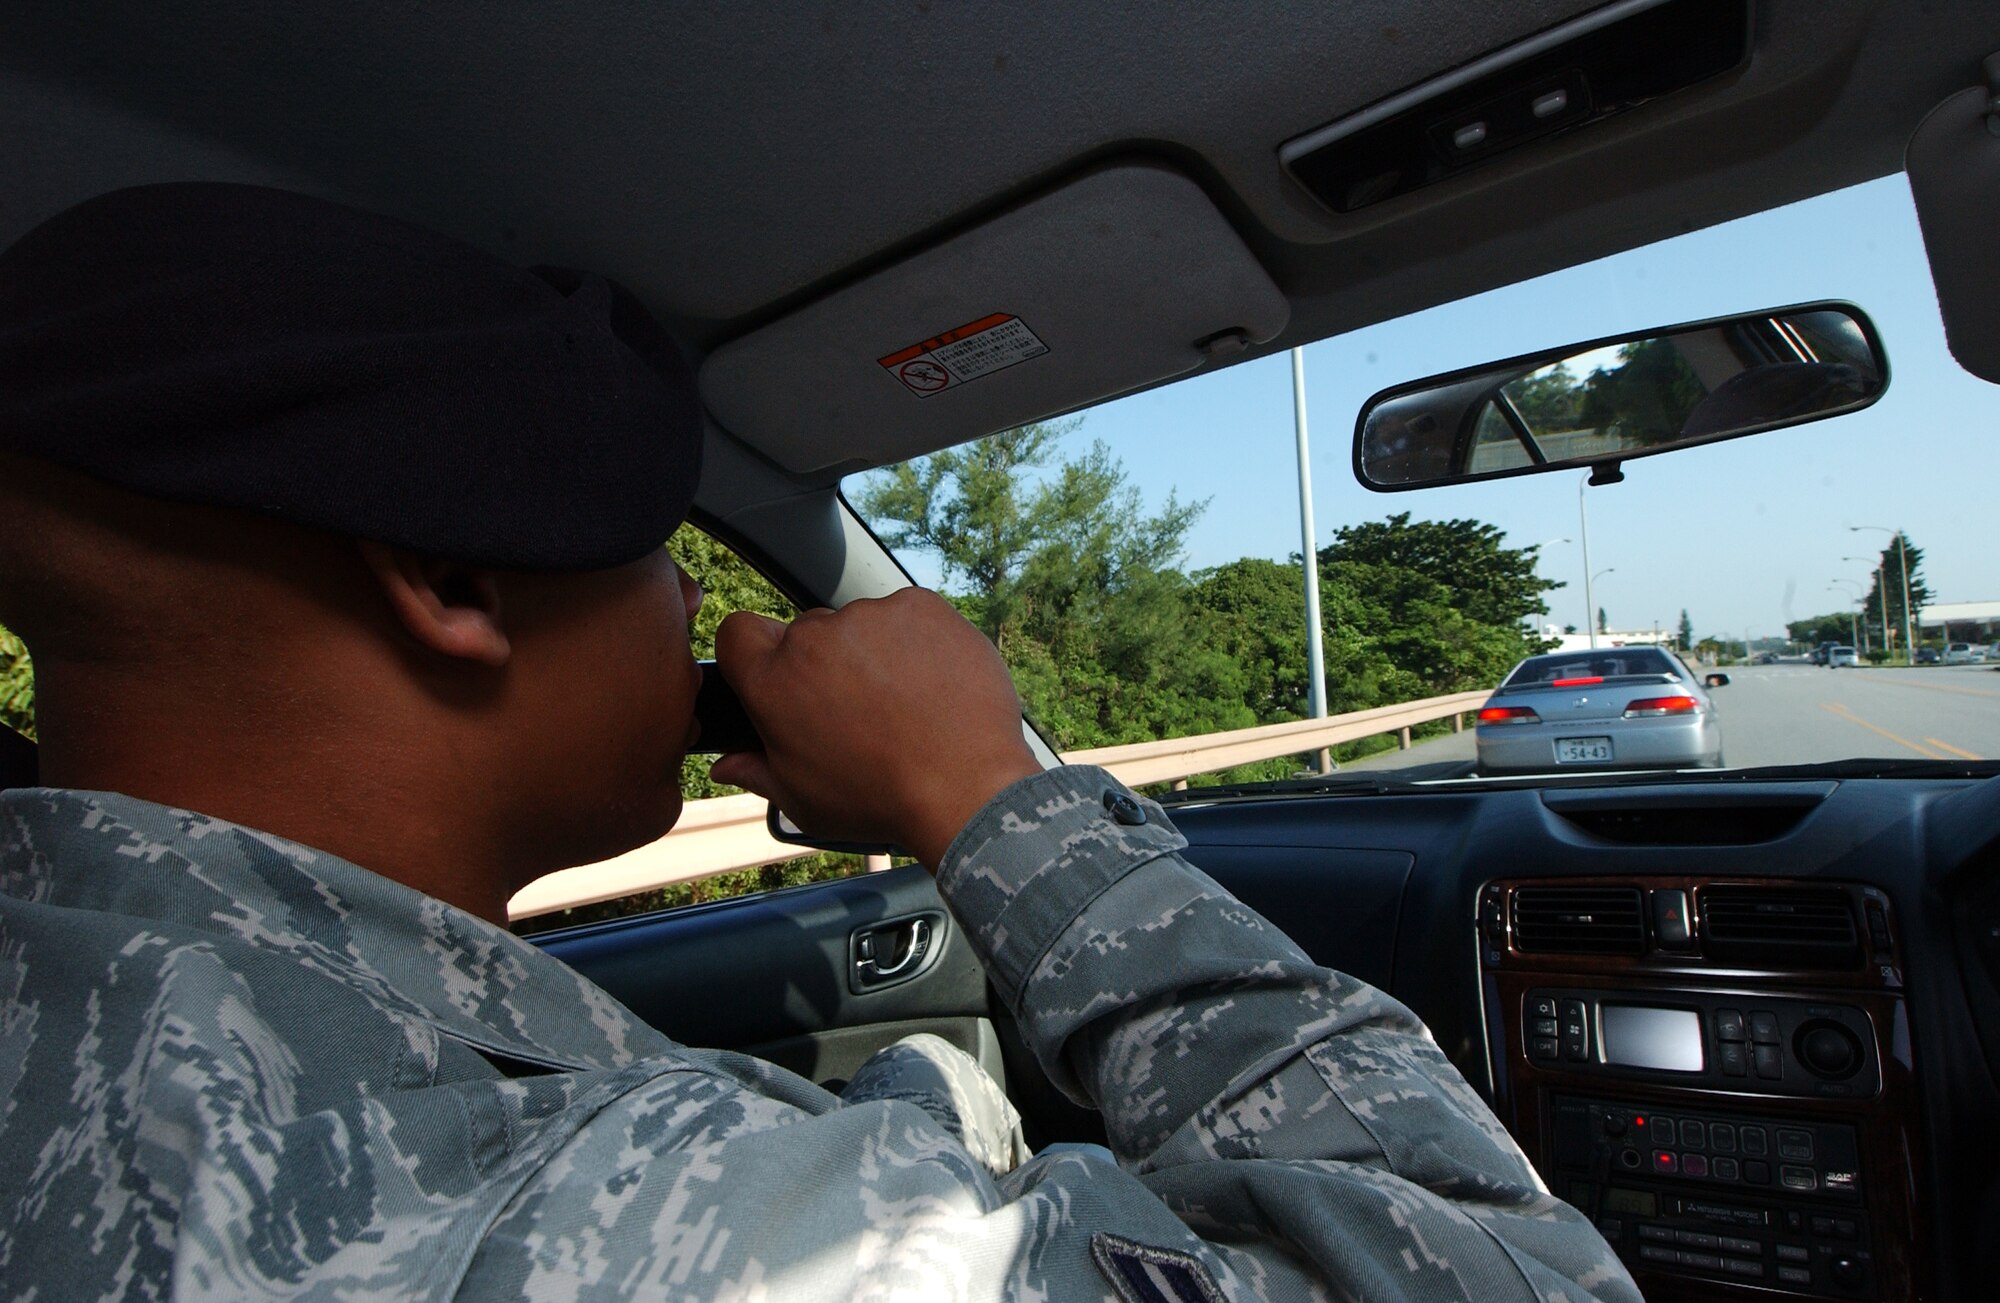 Airman 1st Class Edward Bailey uses a voice speaker to direct a driver to pullover during a traffic stop Oct. 27 at Kadena Air Base, Japan. The Airmen are part of a traffic enforcement team to keep a safe and secure environment for all personnel on the installation.   (U.S. Air Force photo/Tech. Sgt. Rey Ramon)    